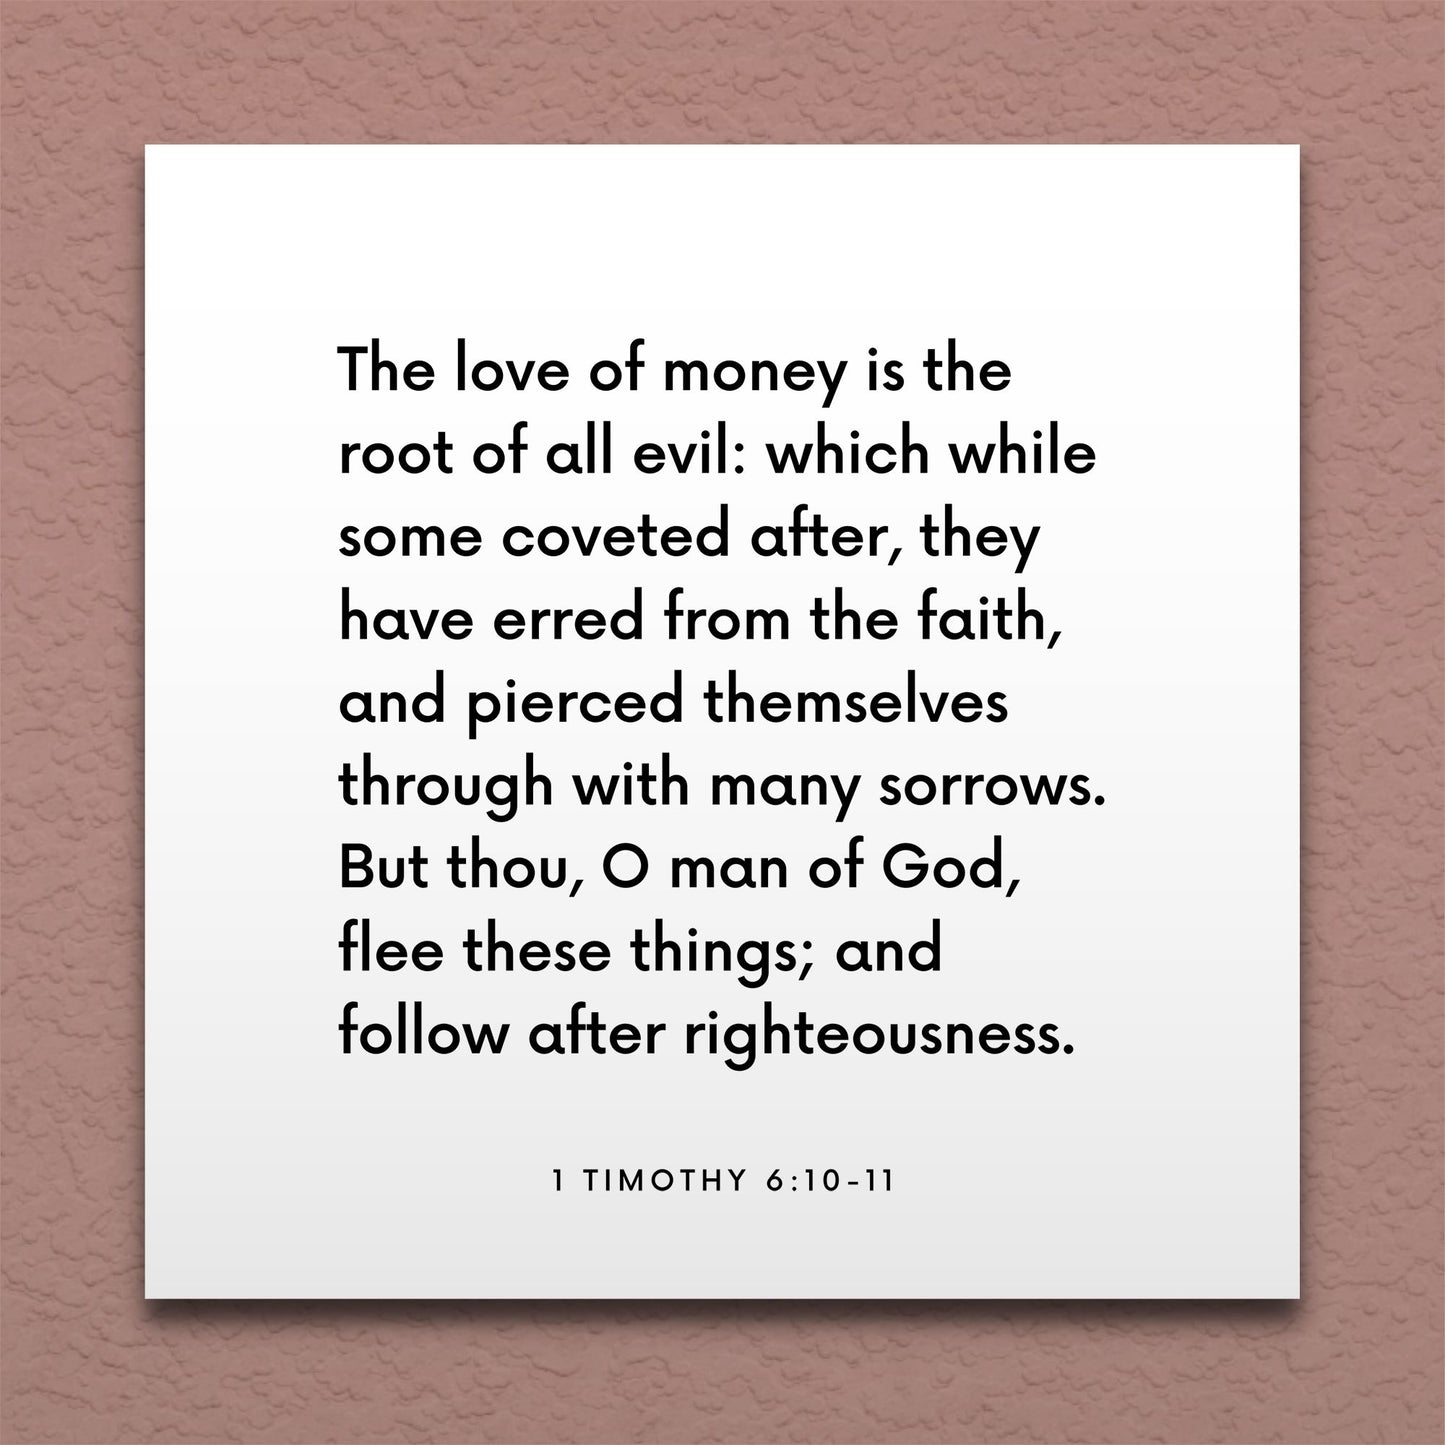 Wall-mounted scripture tile for 1 Timothy 6:10-11 - "The love of money is the root of all evil"